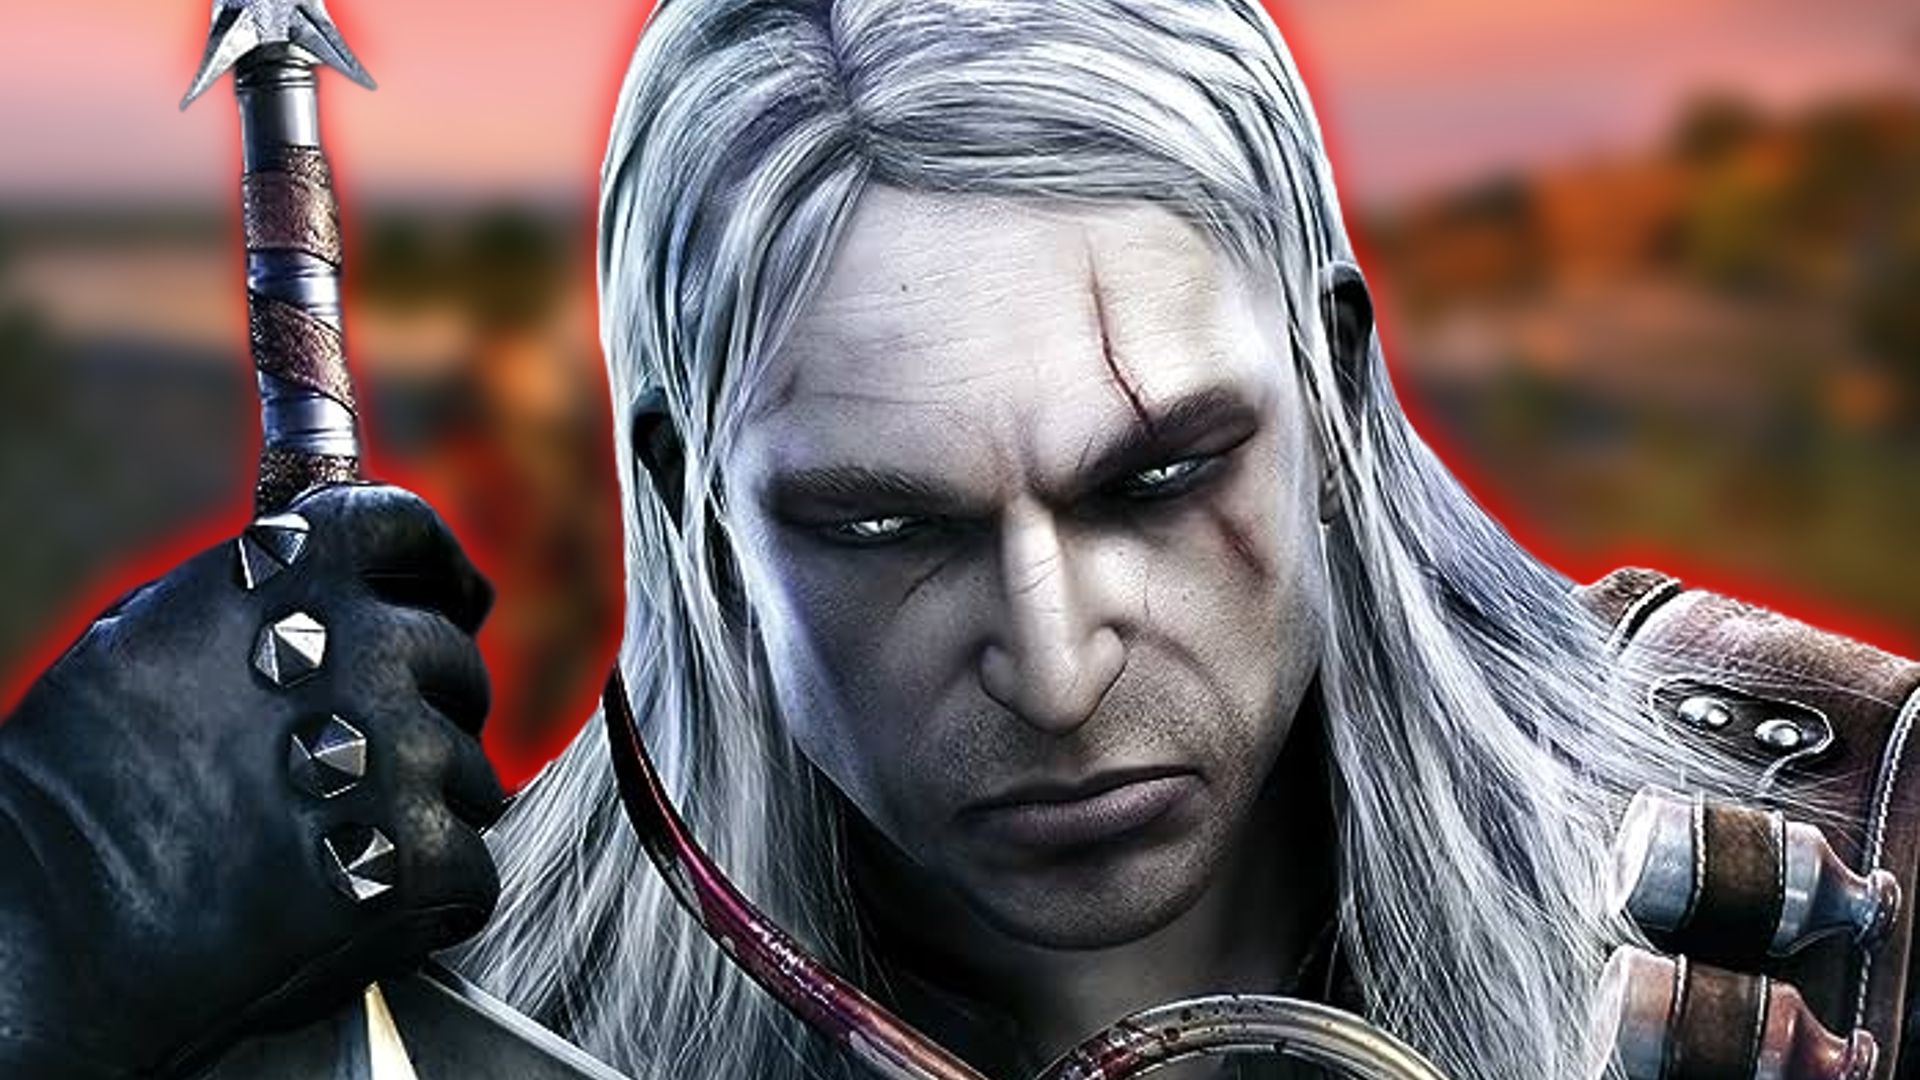 The Witcher 4 release date speculation, latest news and rumours